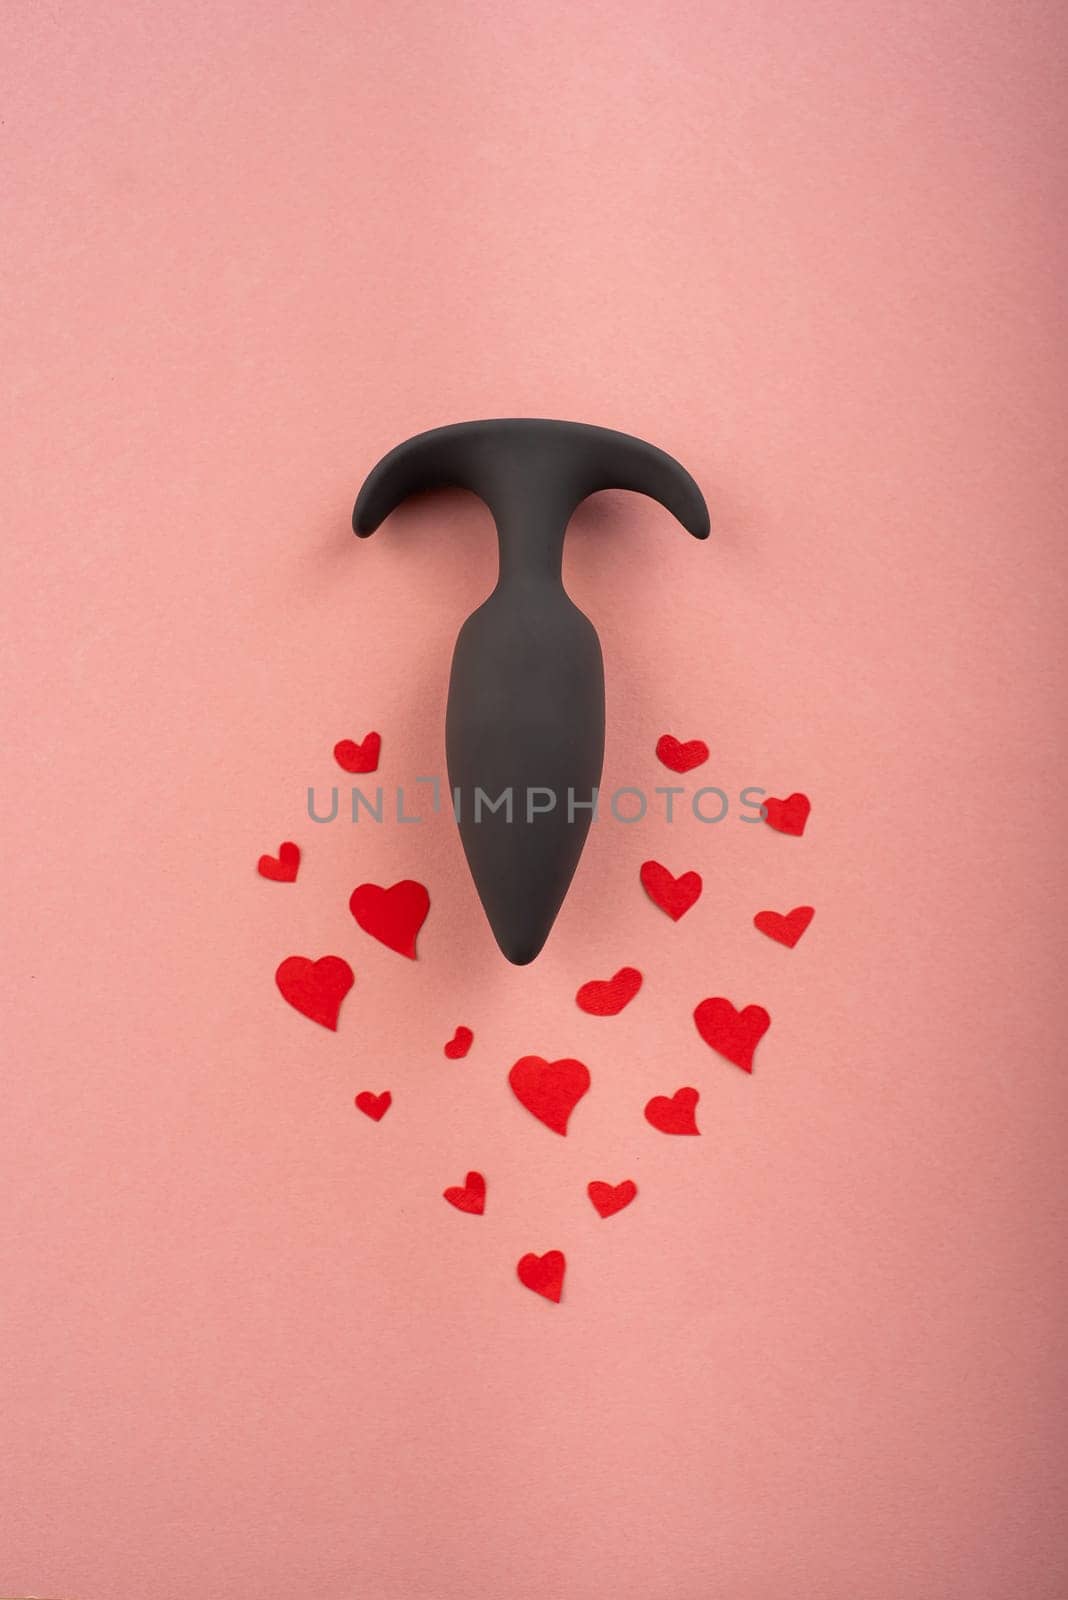 Butt plug and hearts on a pink background. Love symbol for February 14 by mrwed54